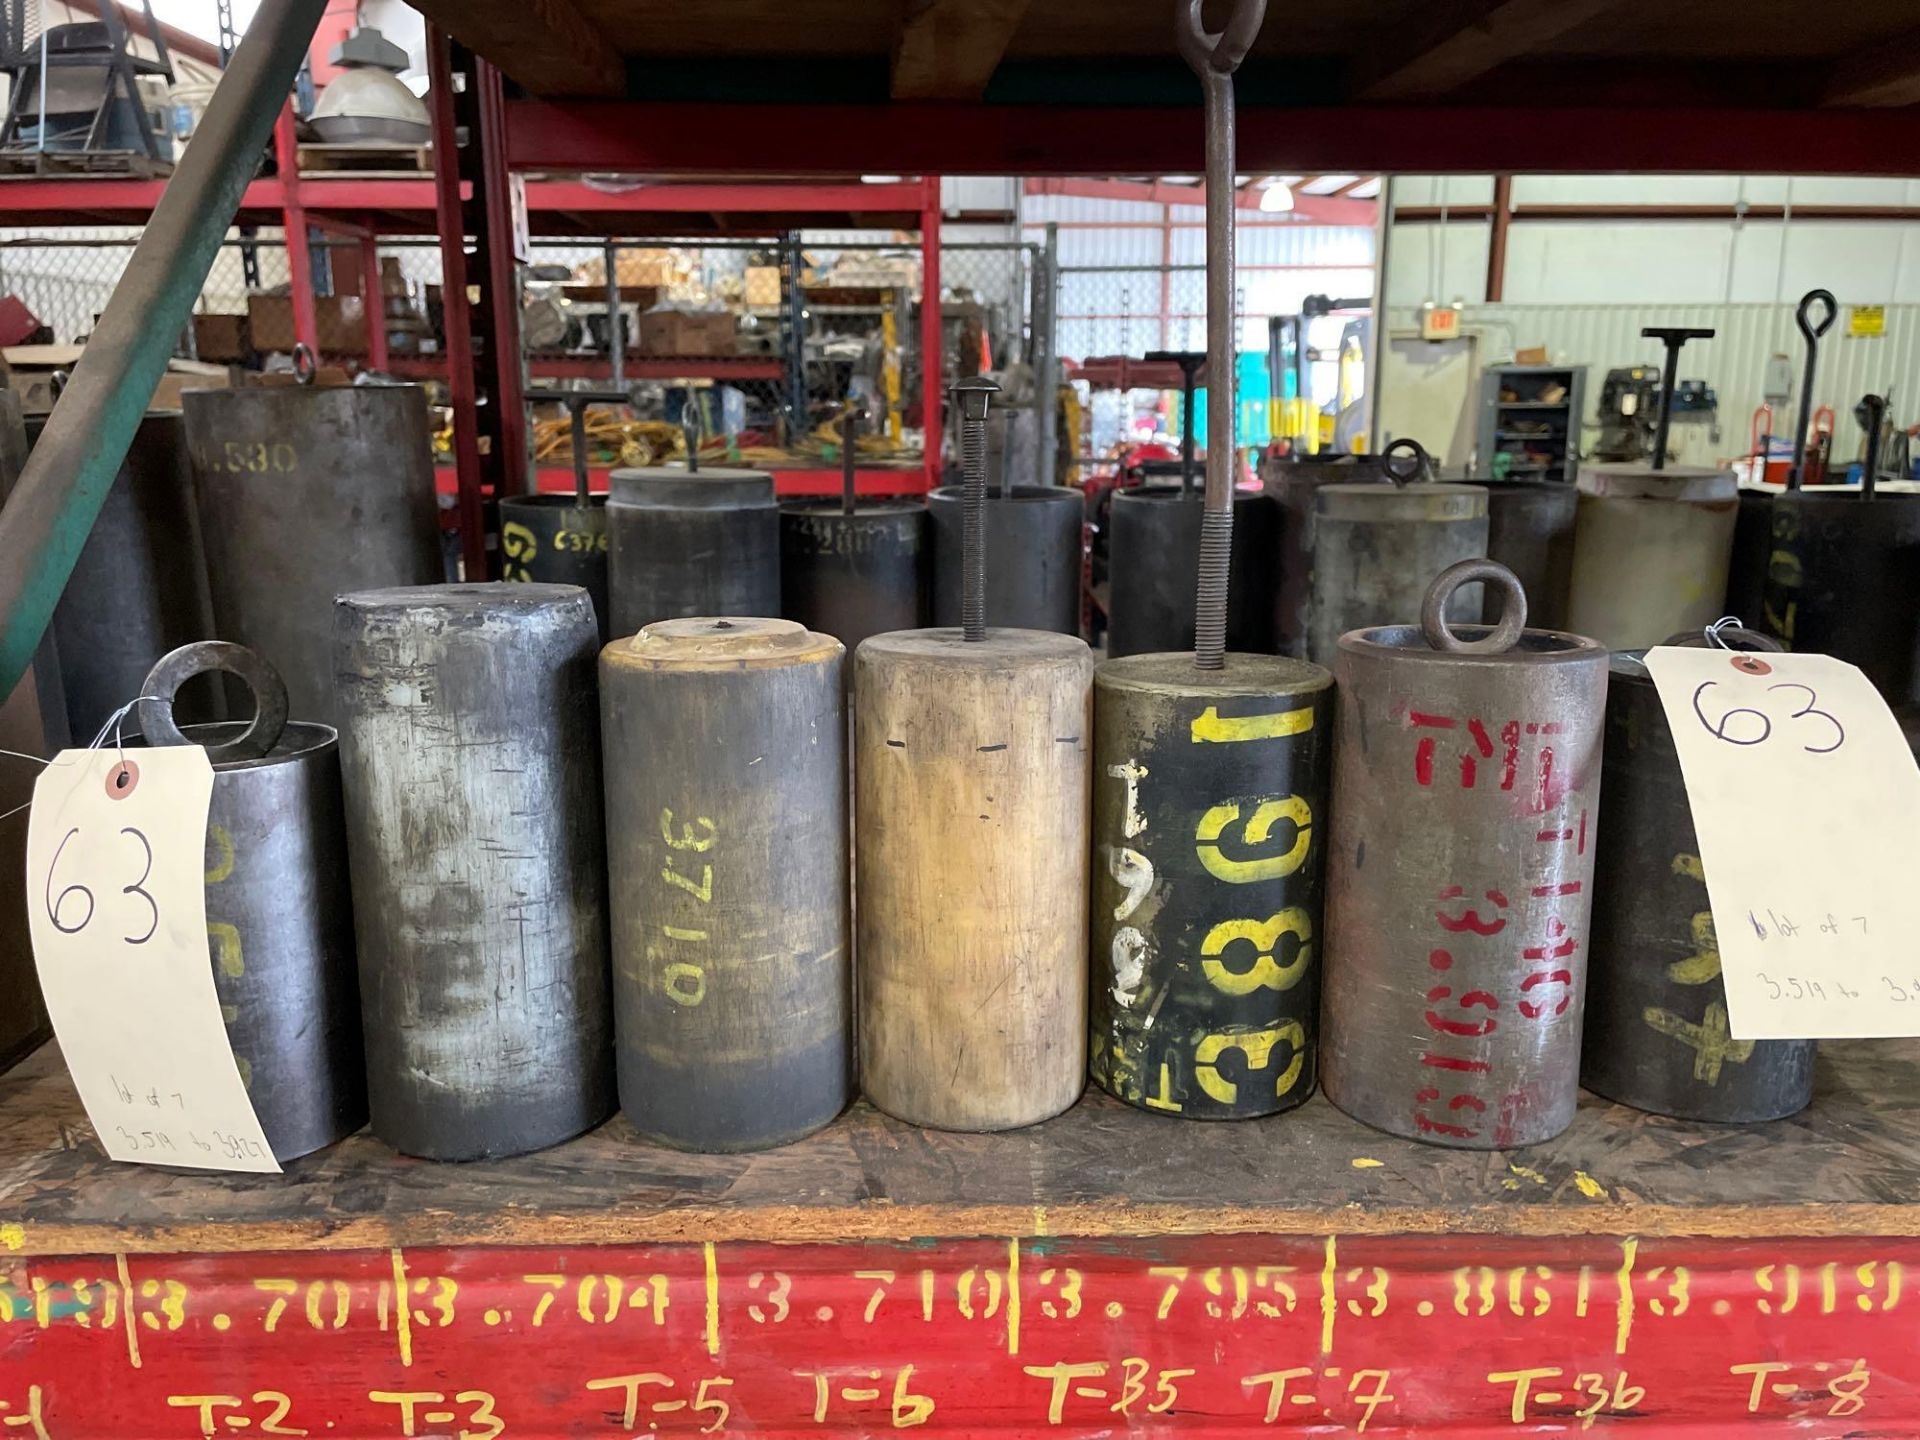 Lot of 7: Pipe Testing Drifts, Sizes from 3.519 to 3.927 - Image 8 of 8